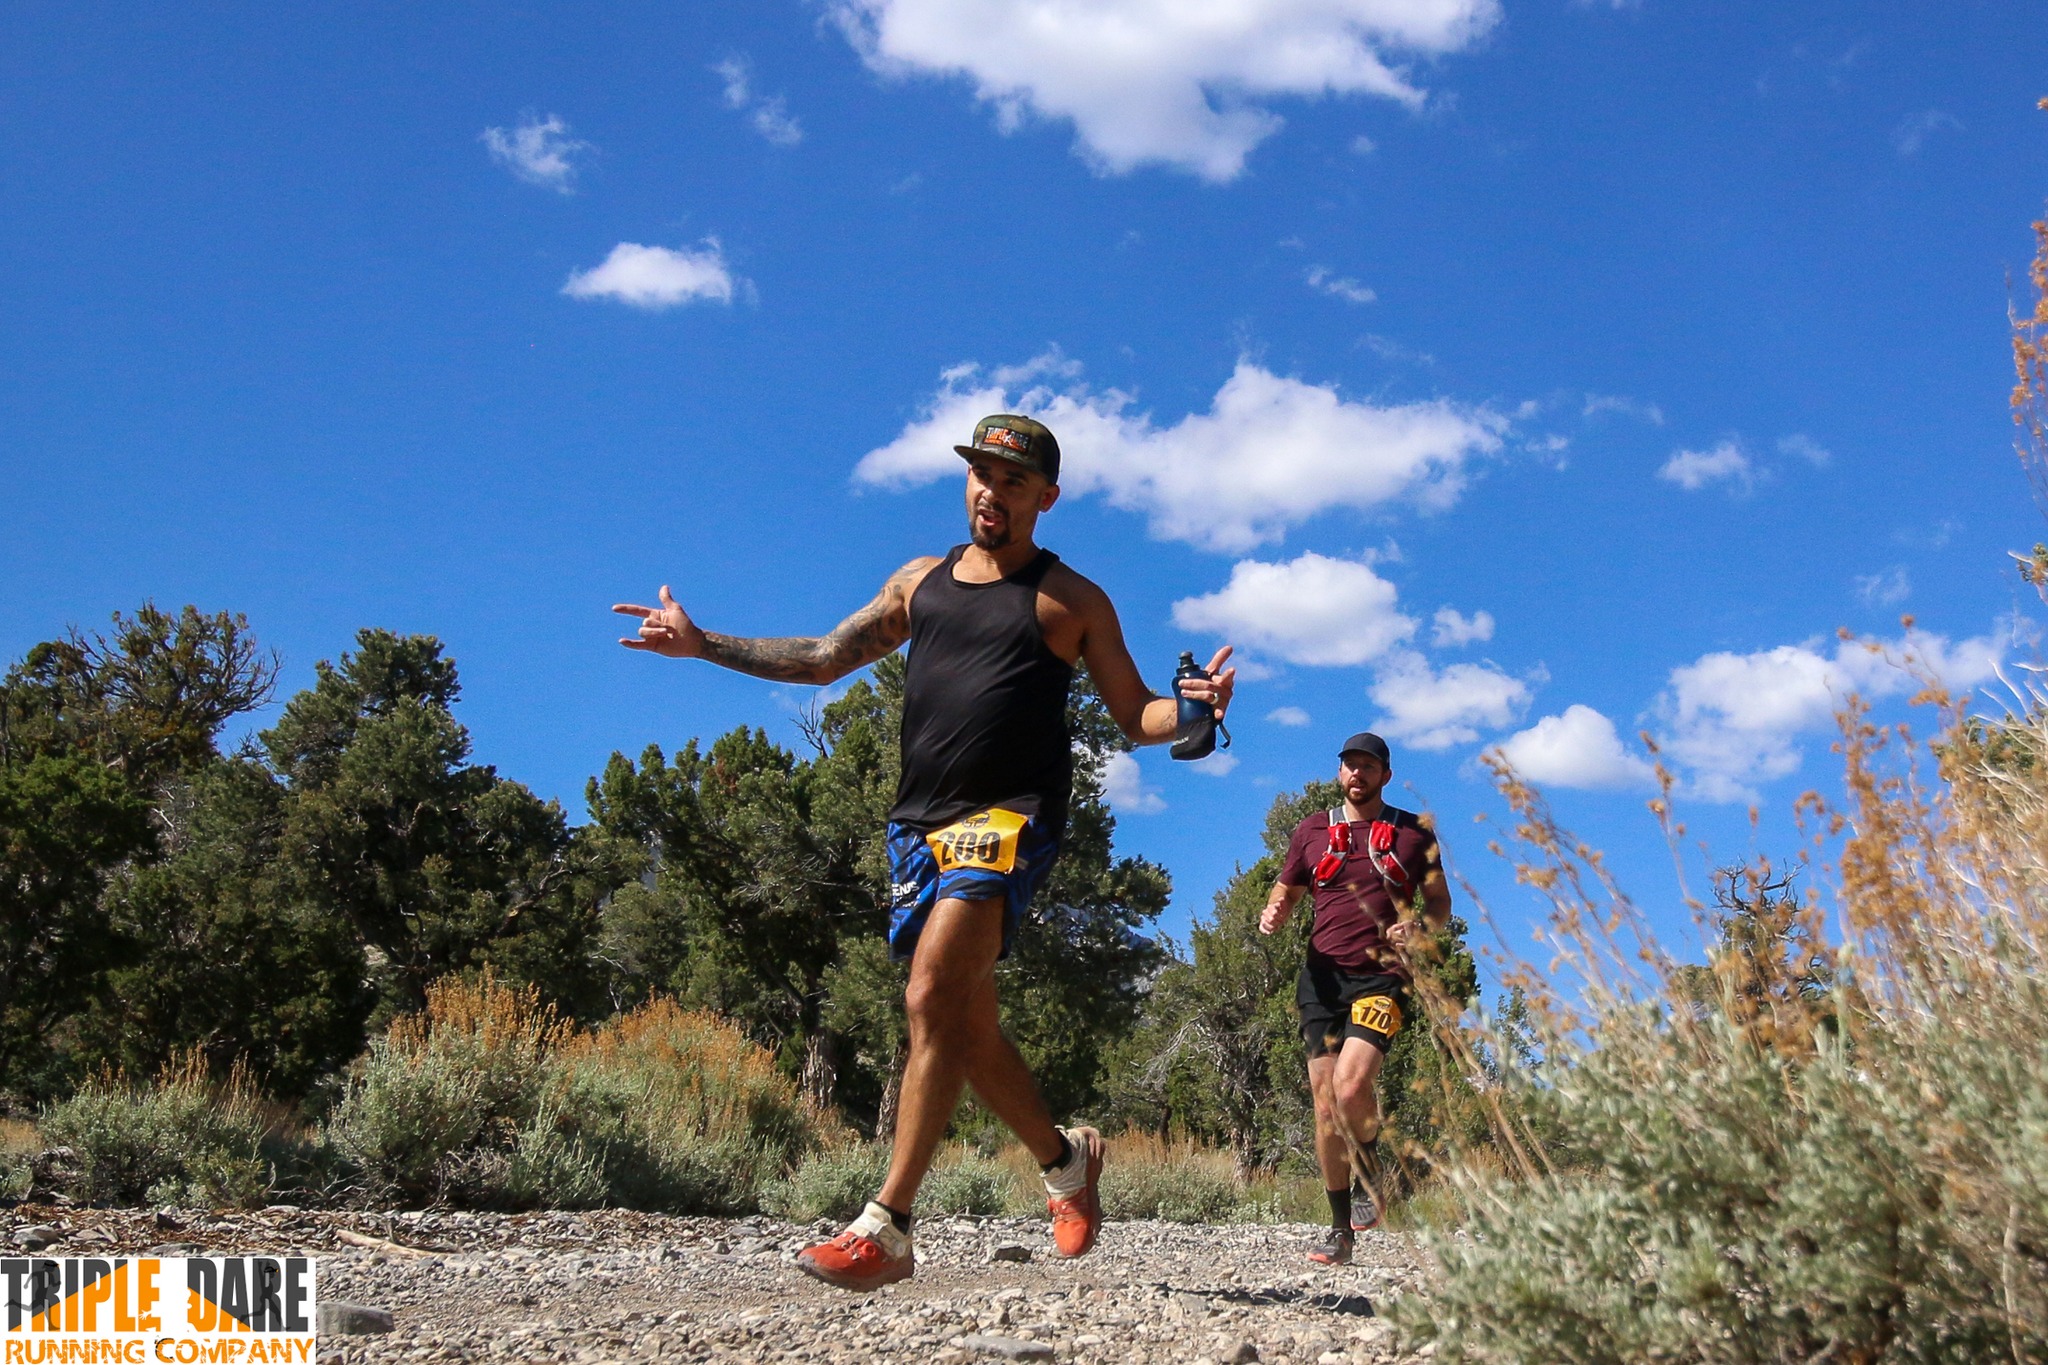 One of our most gorgeous races with amazing scenic views and crisp mountain air!